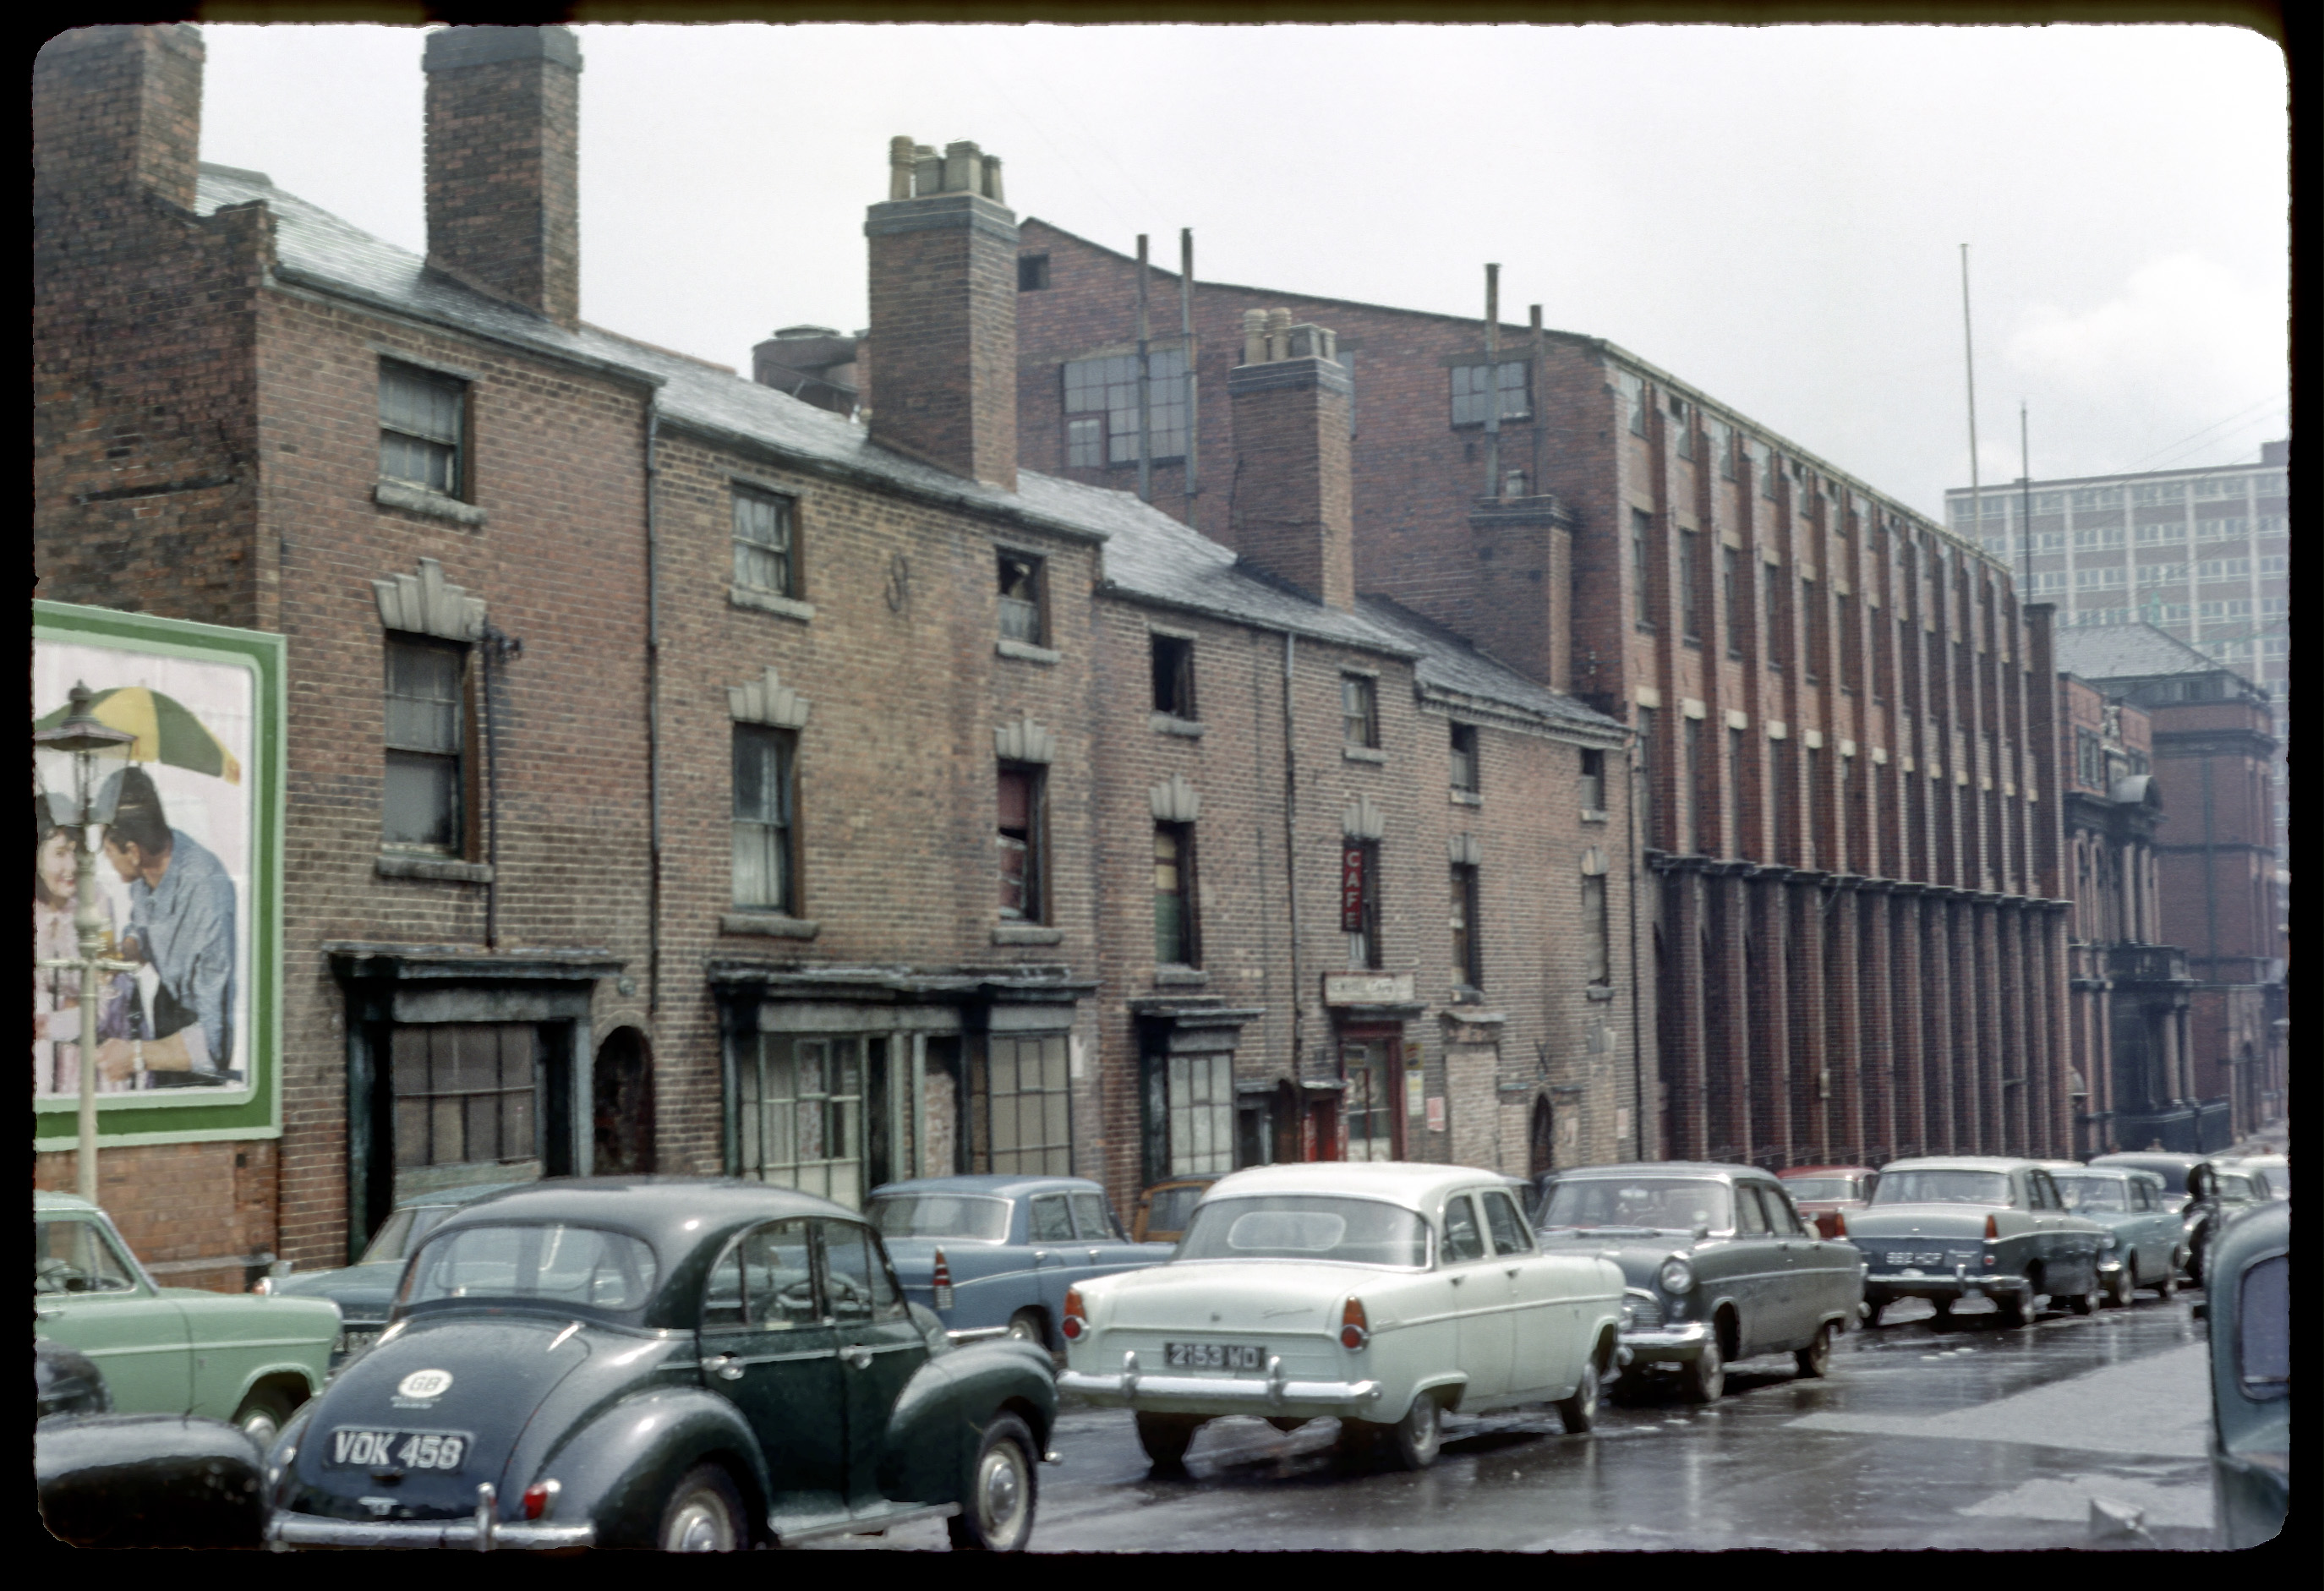 Newhall Street, Central Birmingham - ePapers Repository